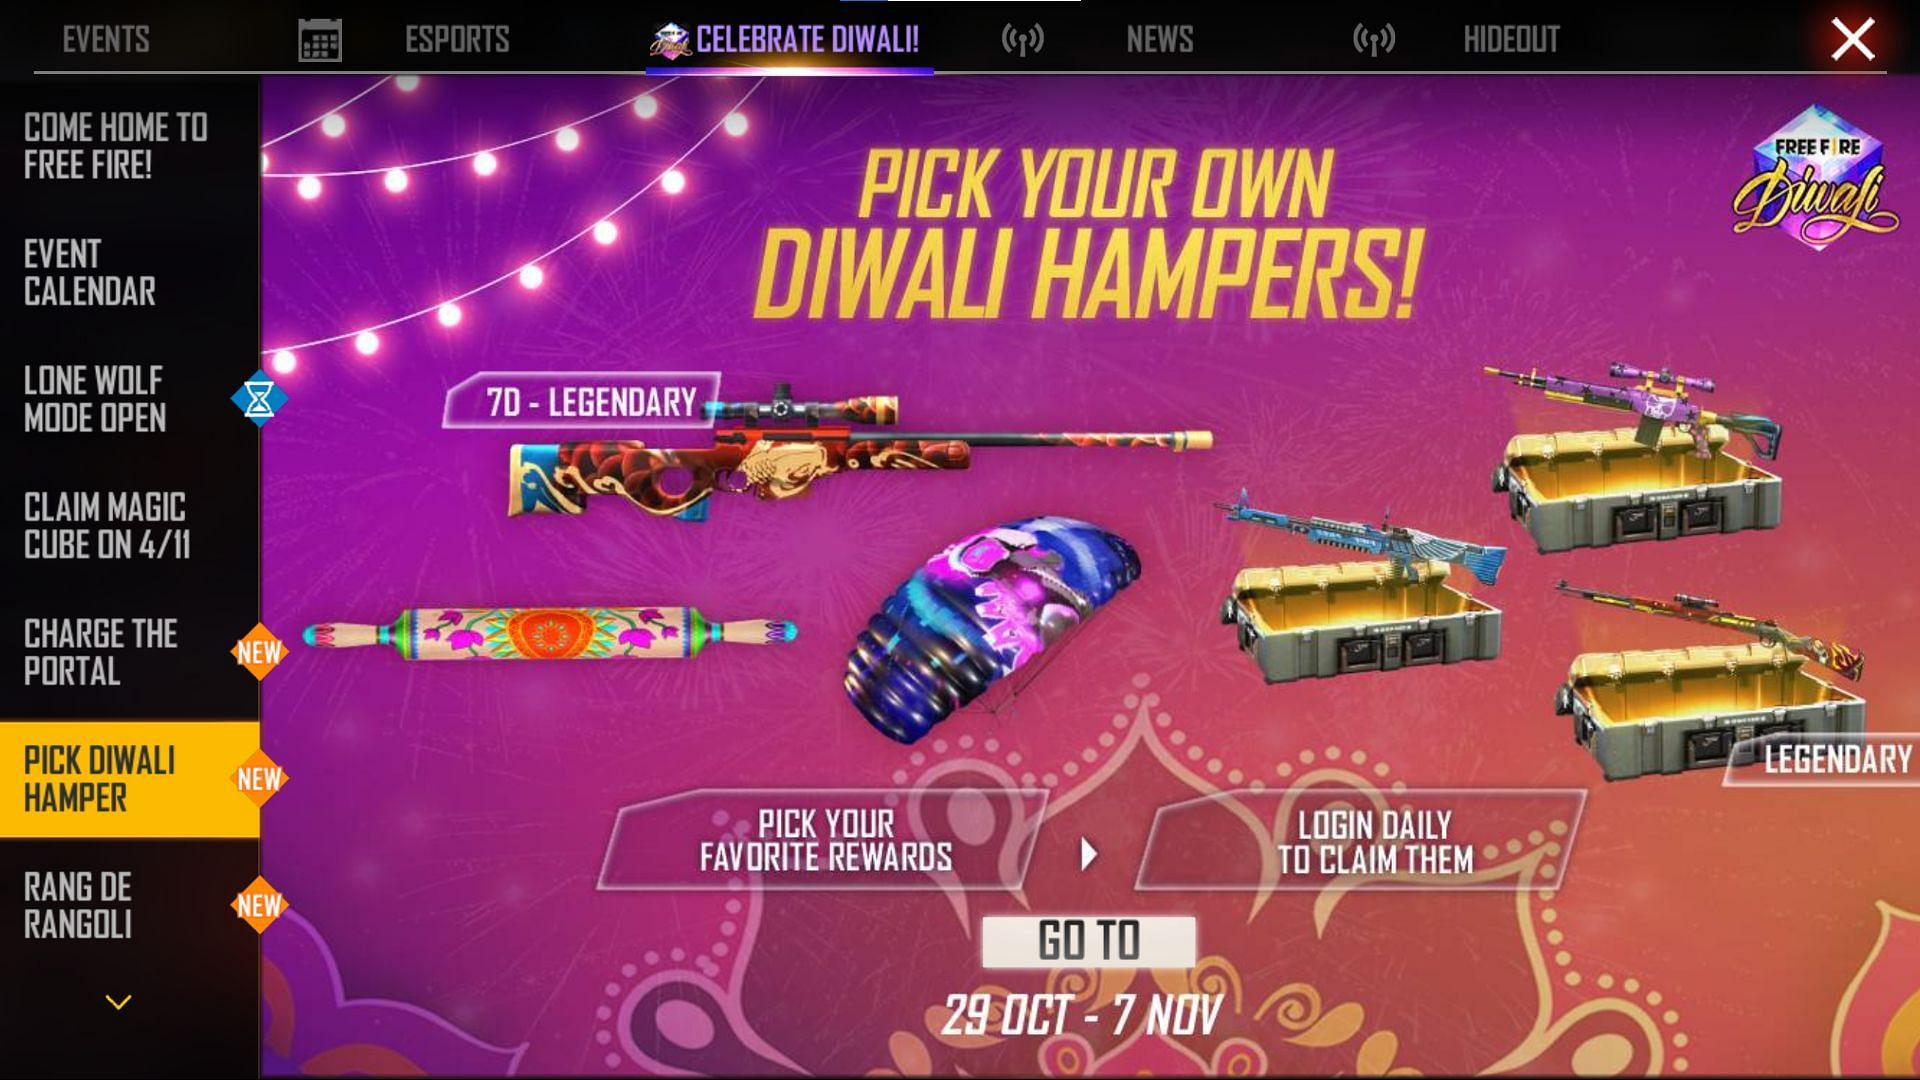 Open Pick Your Own Diwali Hampers interface (Image via Free Fire)